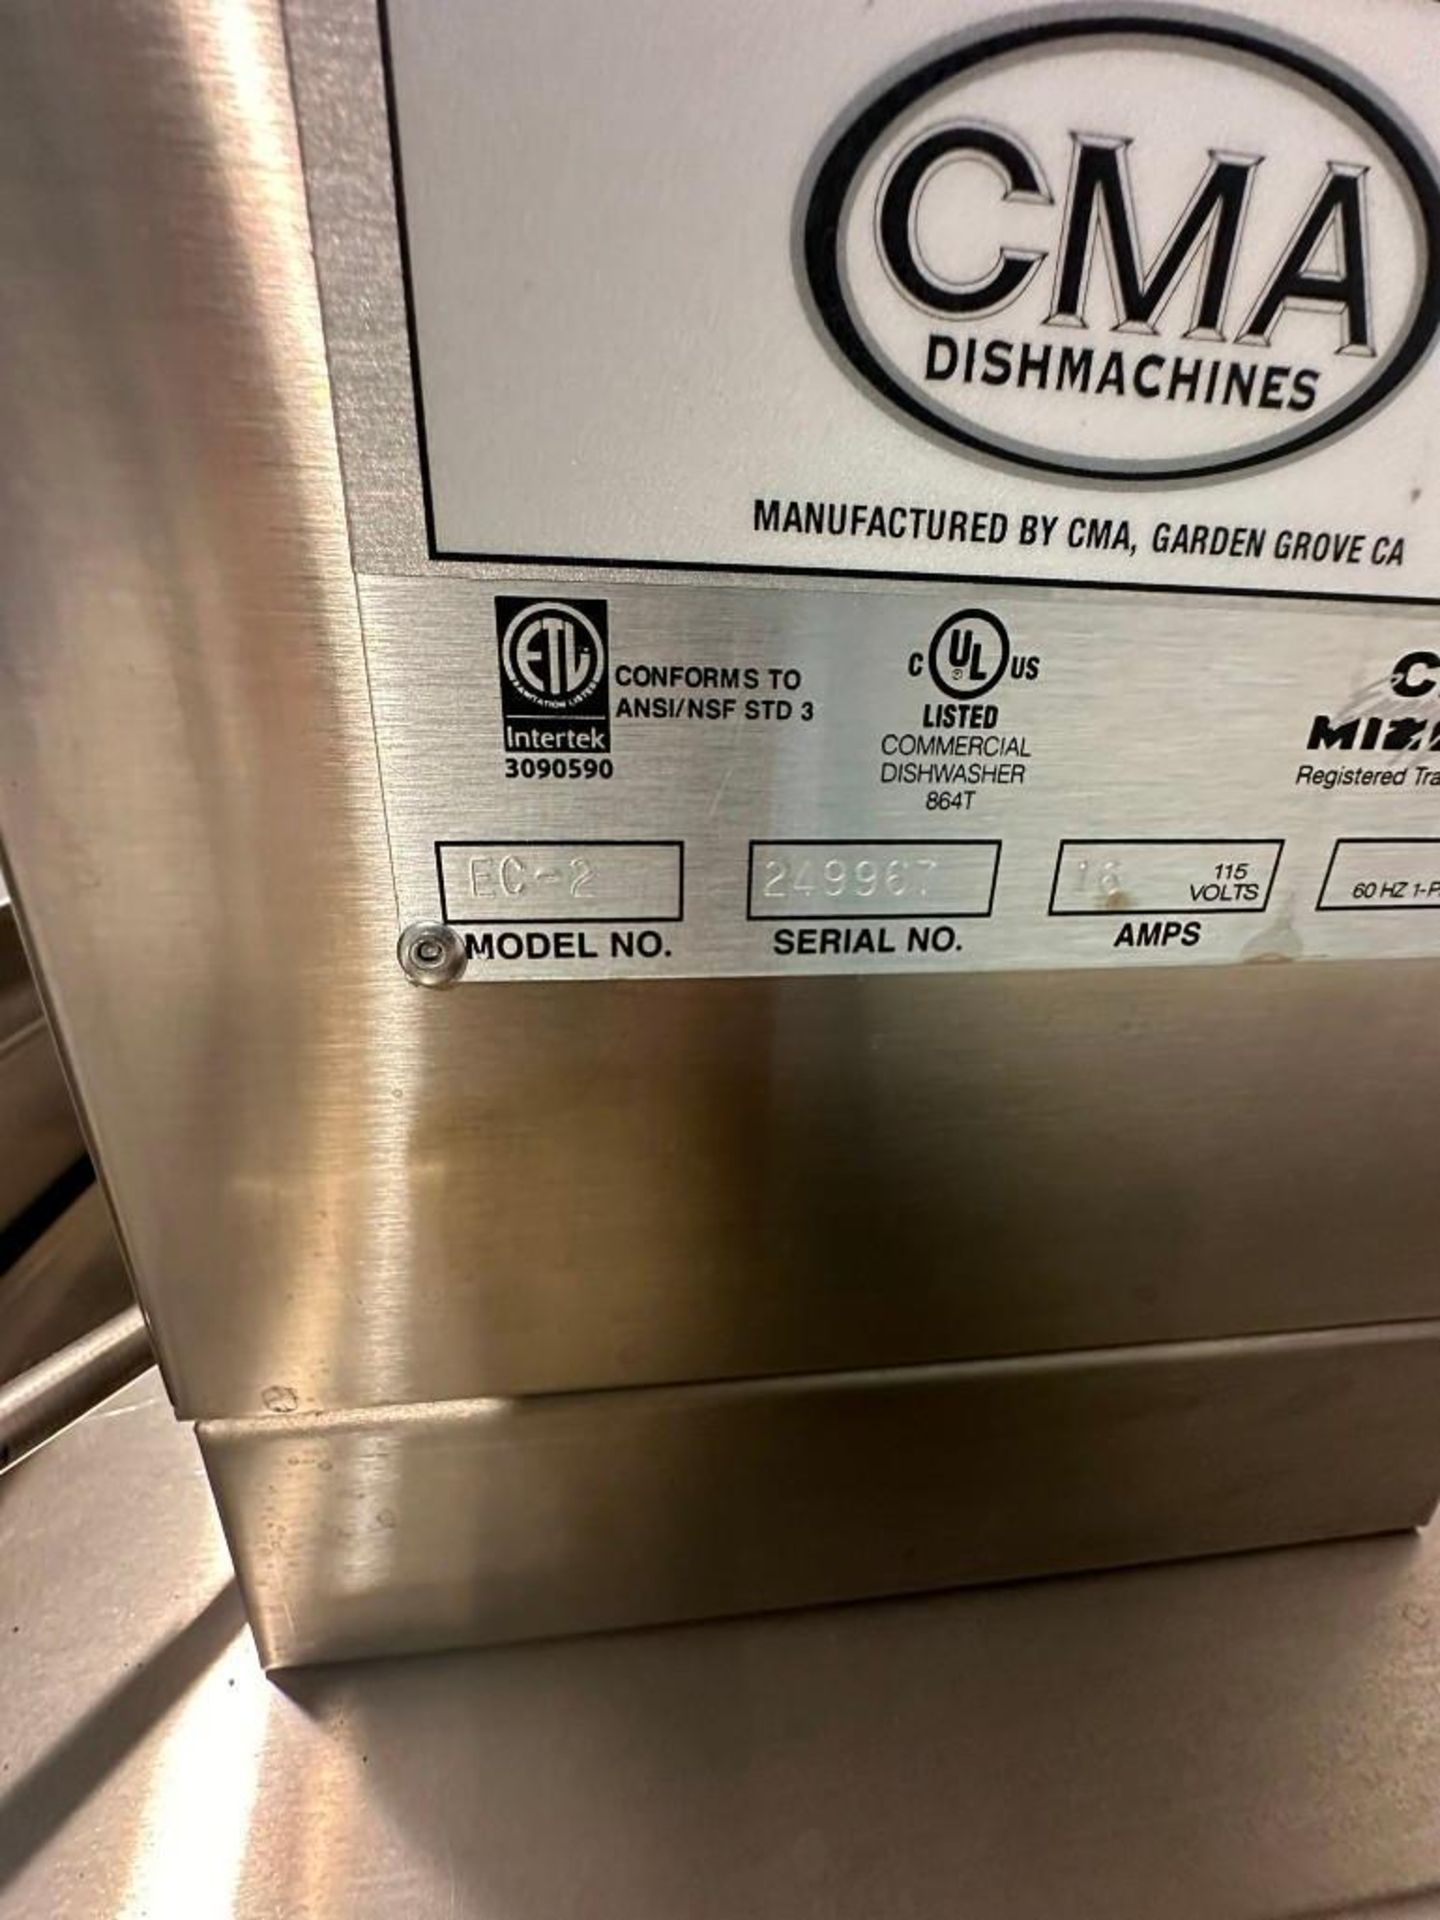 CMA Dishmachines Dishwasher Model EC-2, S/N 249967, with CMA Energy Saver and SS Table - Image 8 of 8